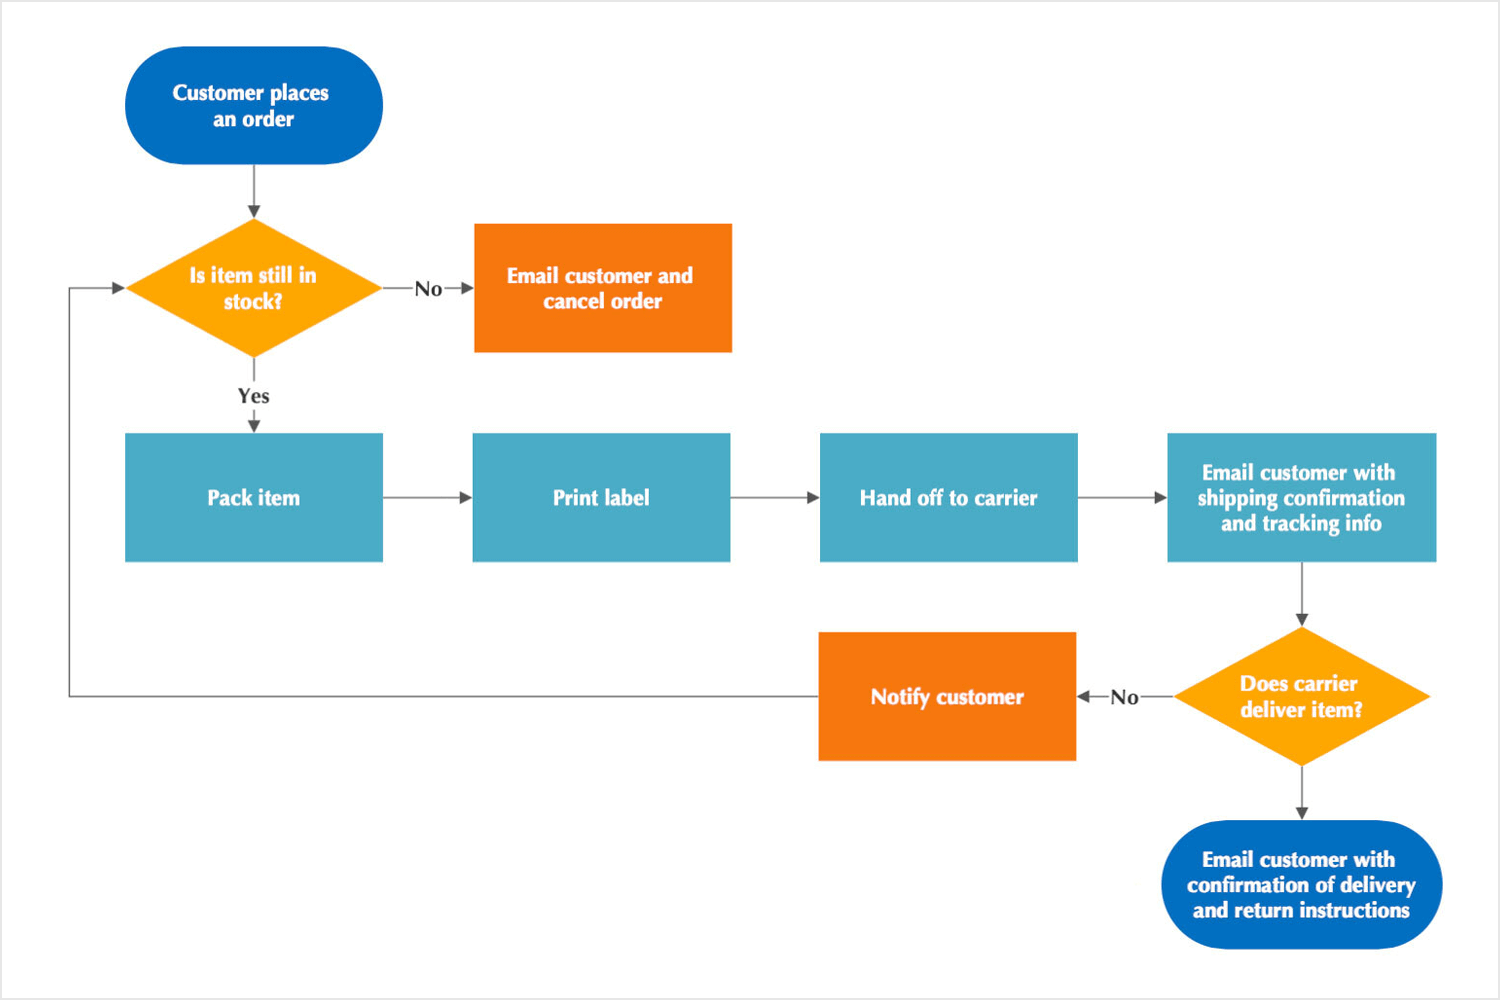 Order fulfillment flowchart created with SmartDraw, illustrating steps from placing an order to delivery confirmation.